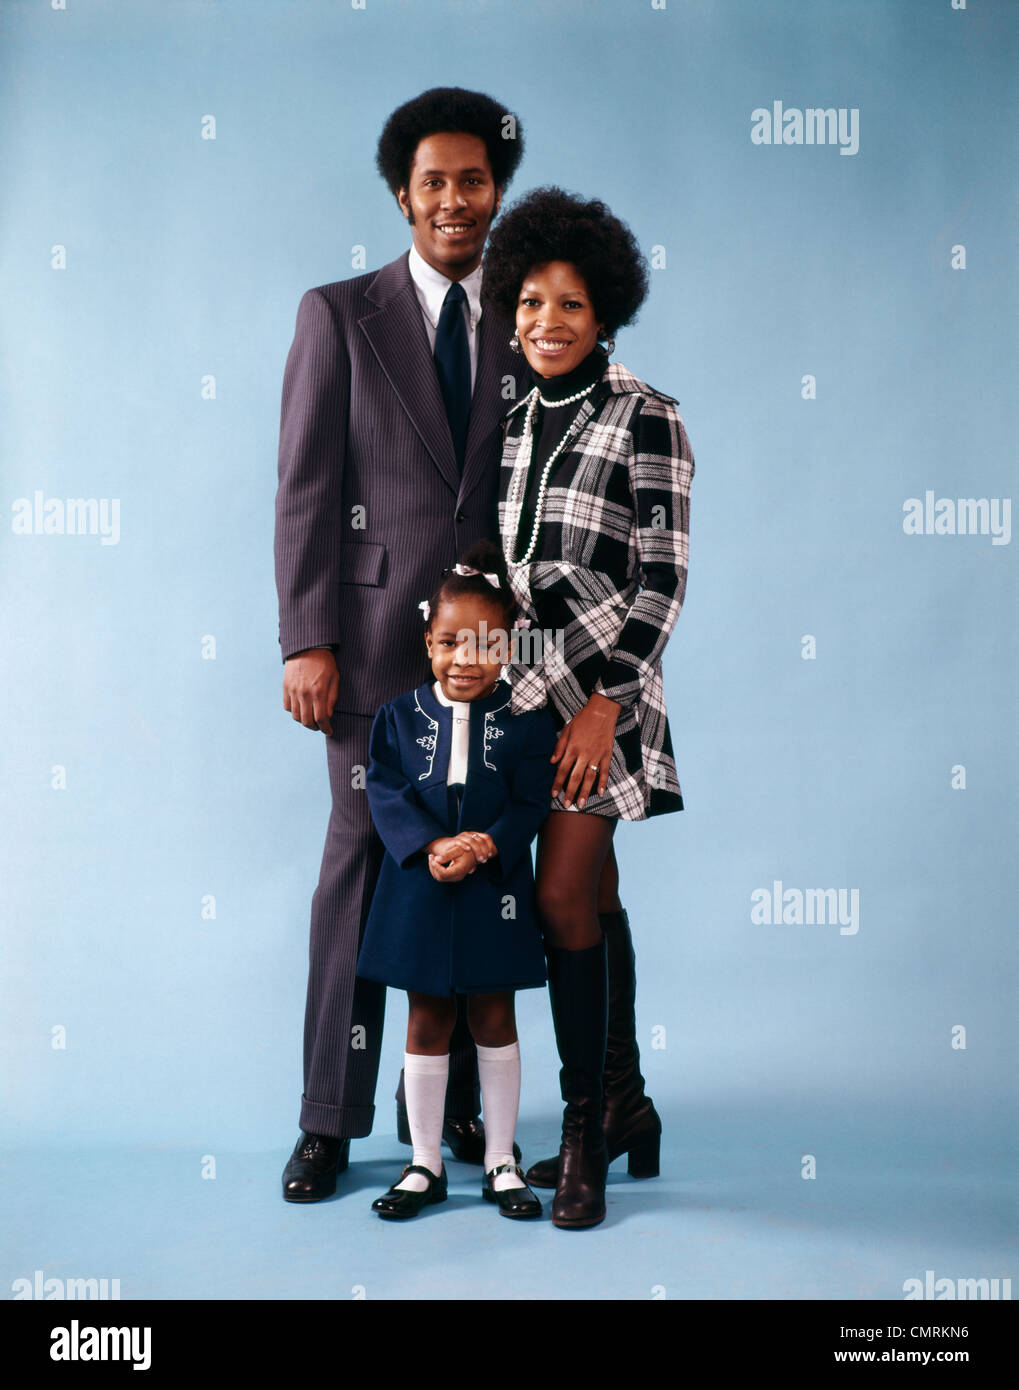 1970 1970s RETRO FAMILY PORTRAIT MOTHER FATHER DAUGHTER BLACK AFRICAN AMERICAN Stock Photo